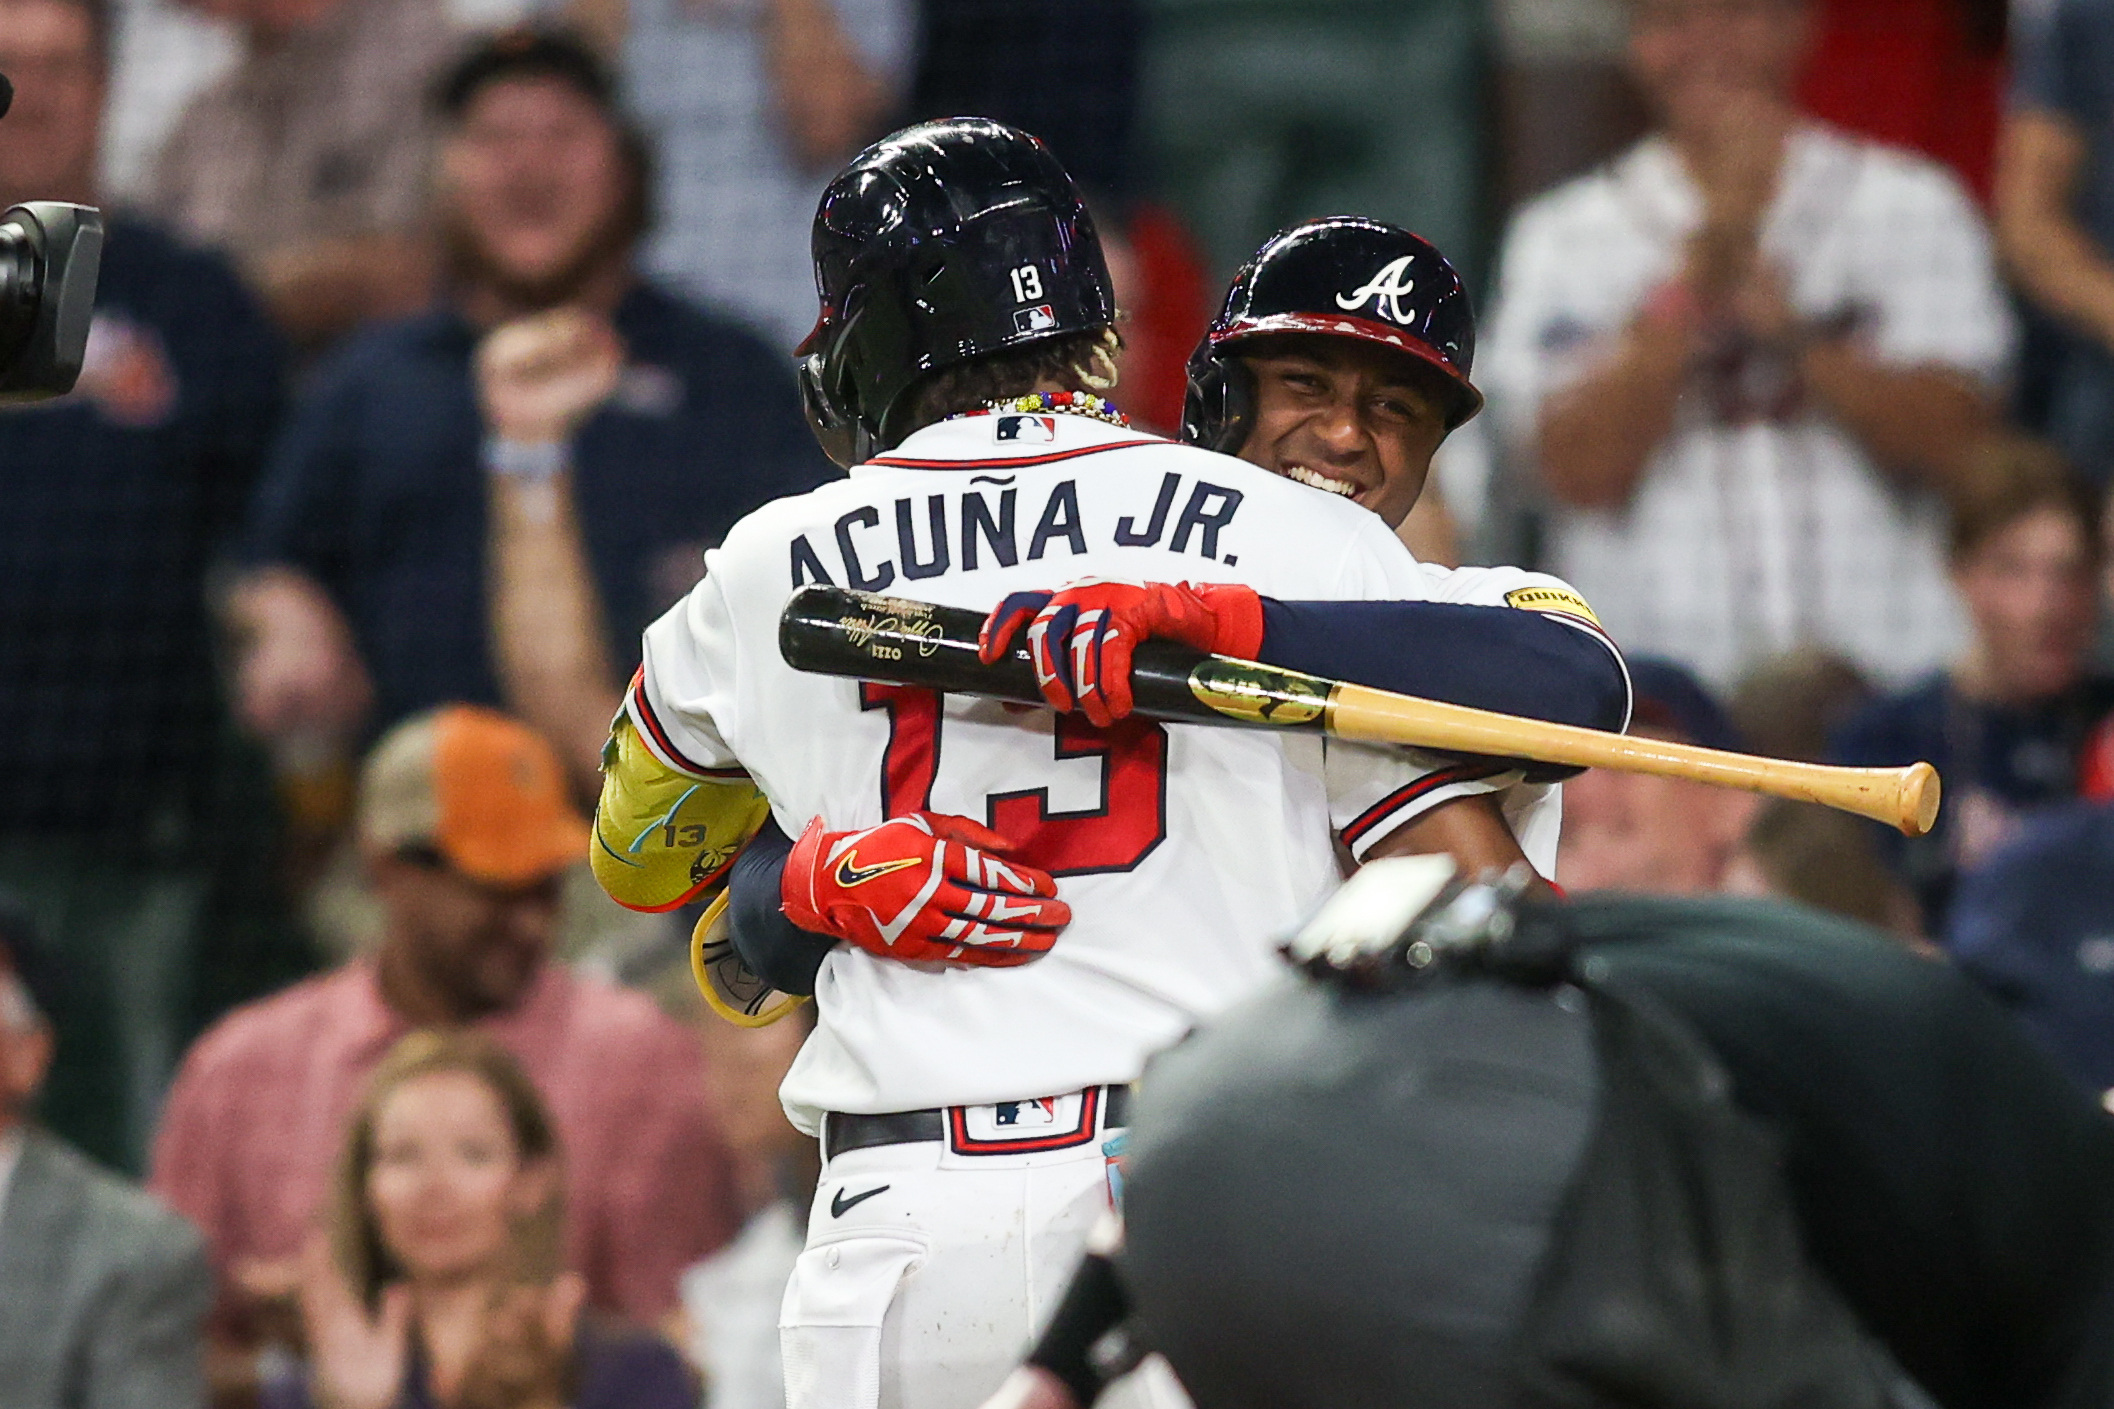 Braves beat Phillies 9-3 behind two home runs by Ronald Acuña Jr.